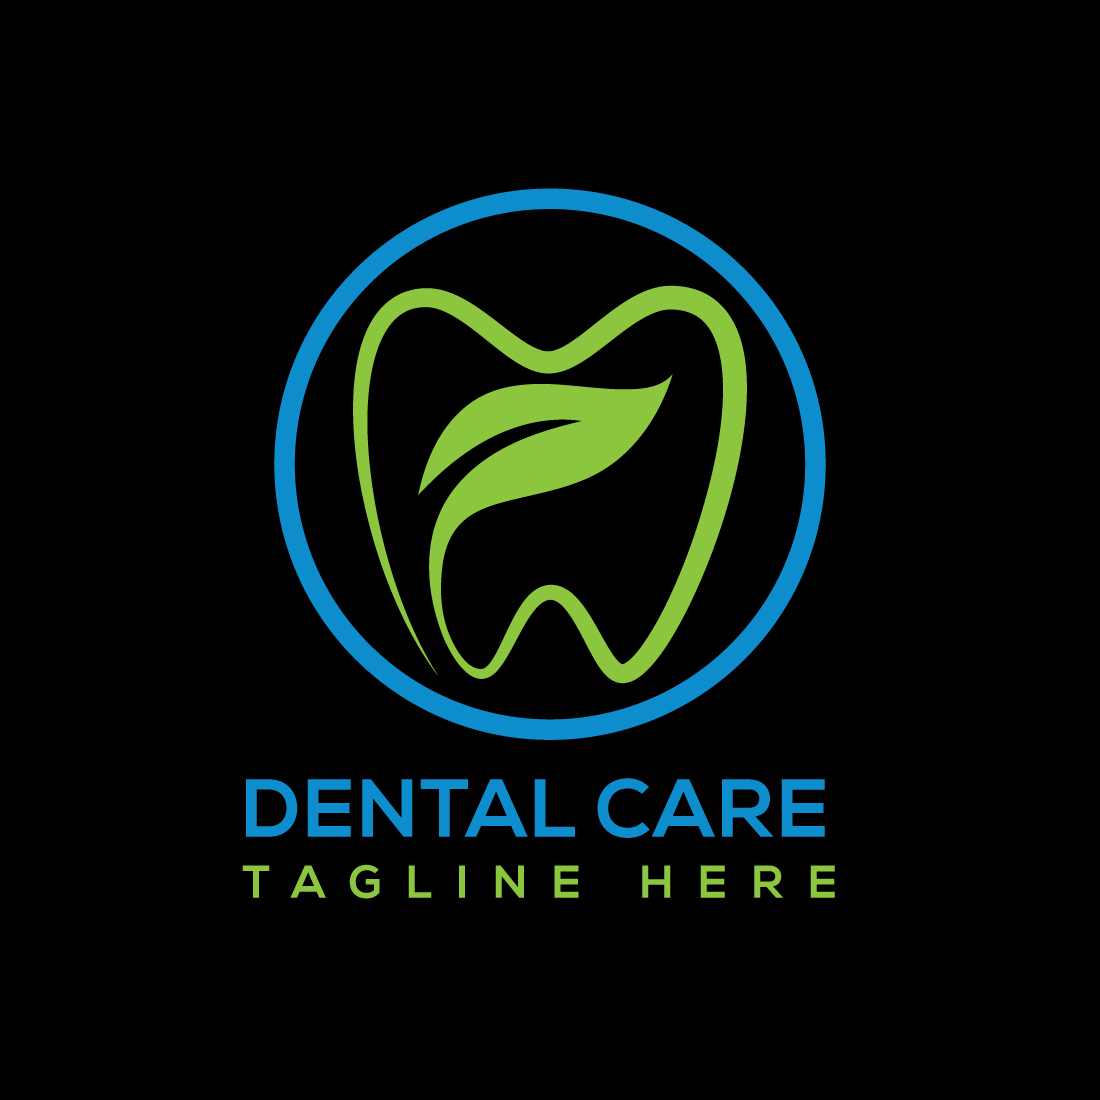 Image of a unique logo in the shape of a tooth on a black background.